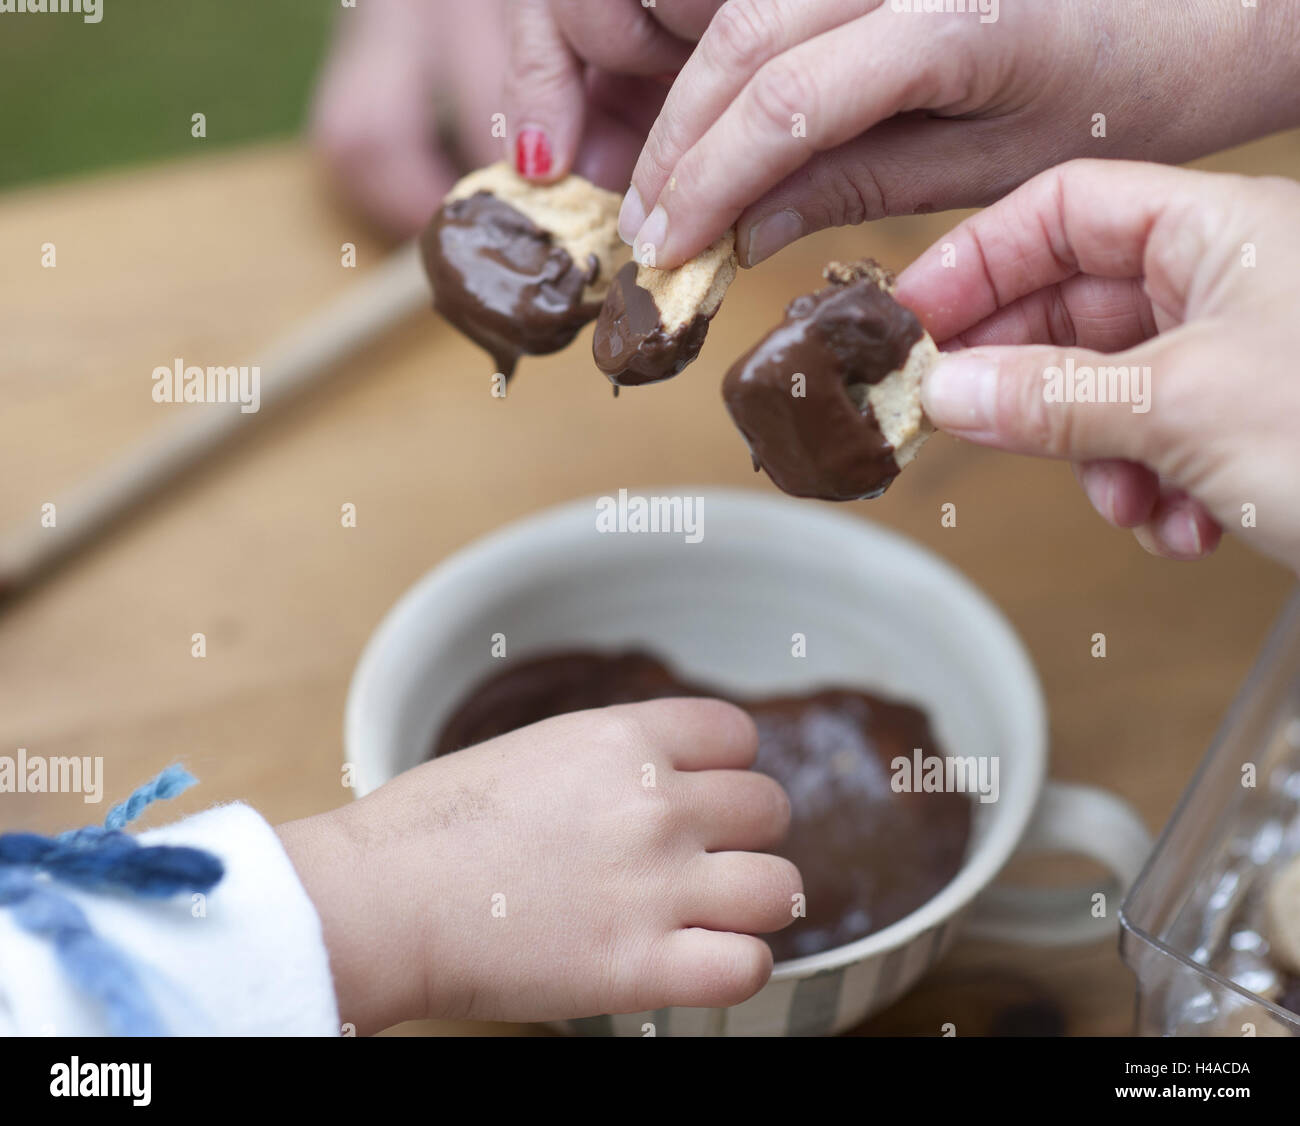 Women, child, little place bake, dive into chocolate, medium close-up, detail, Stock Photo